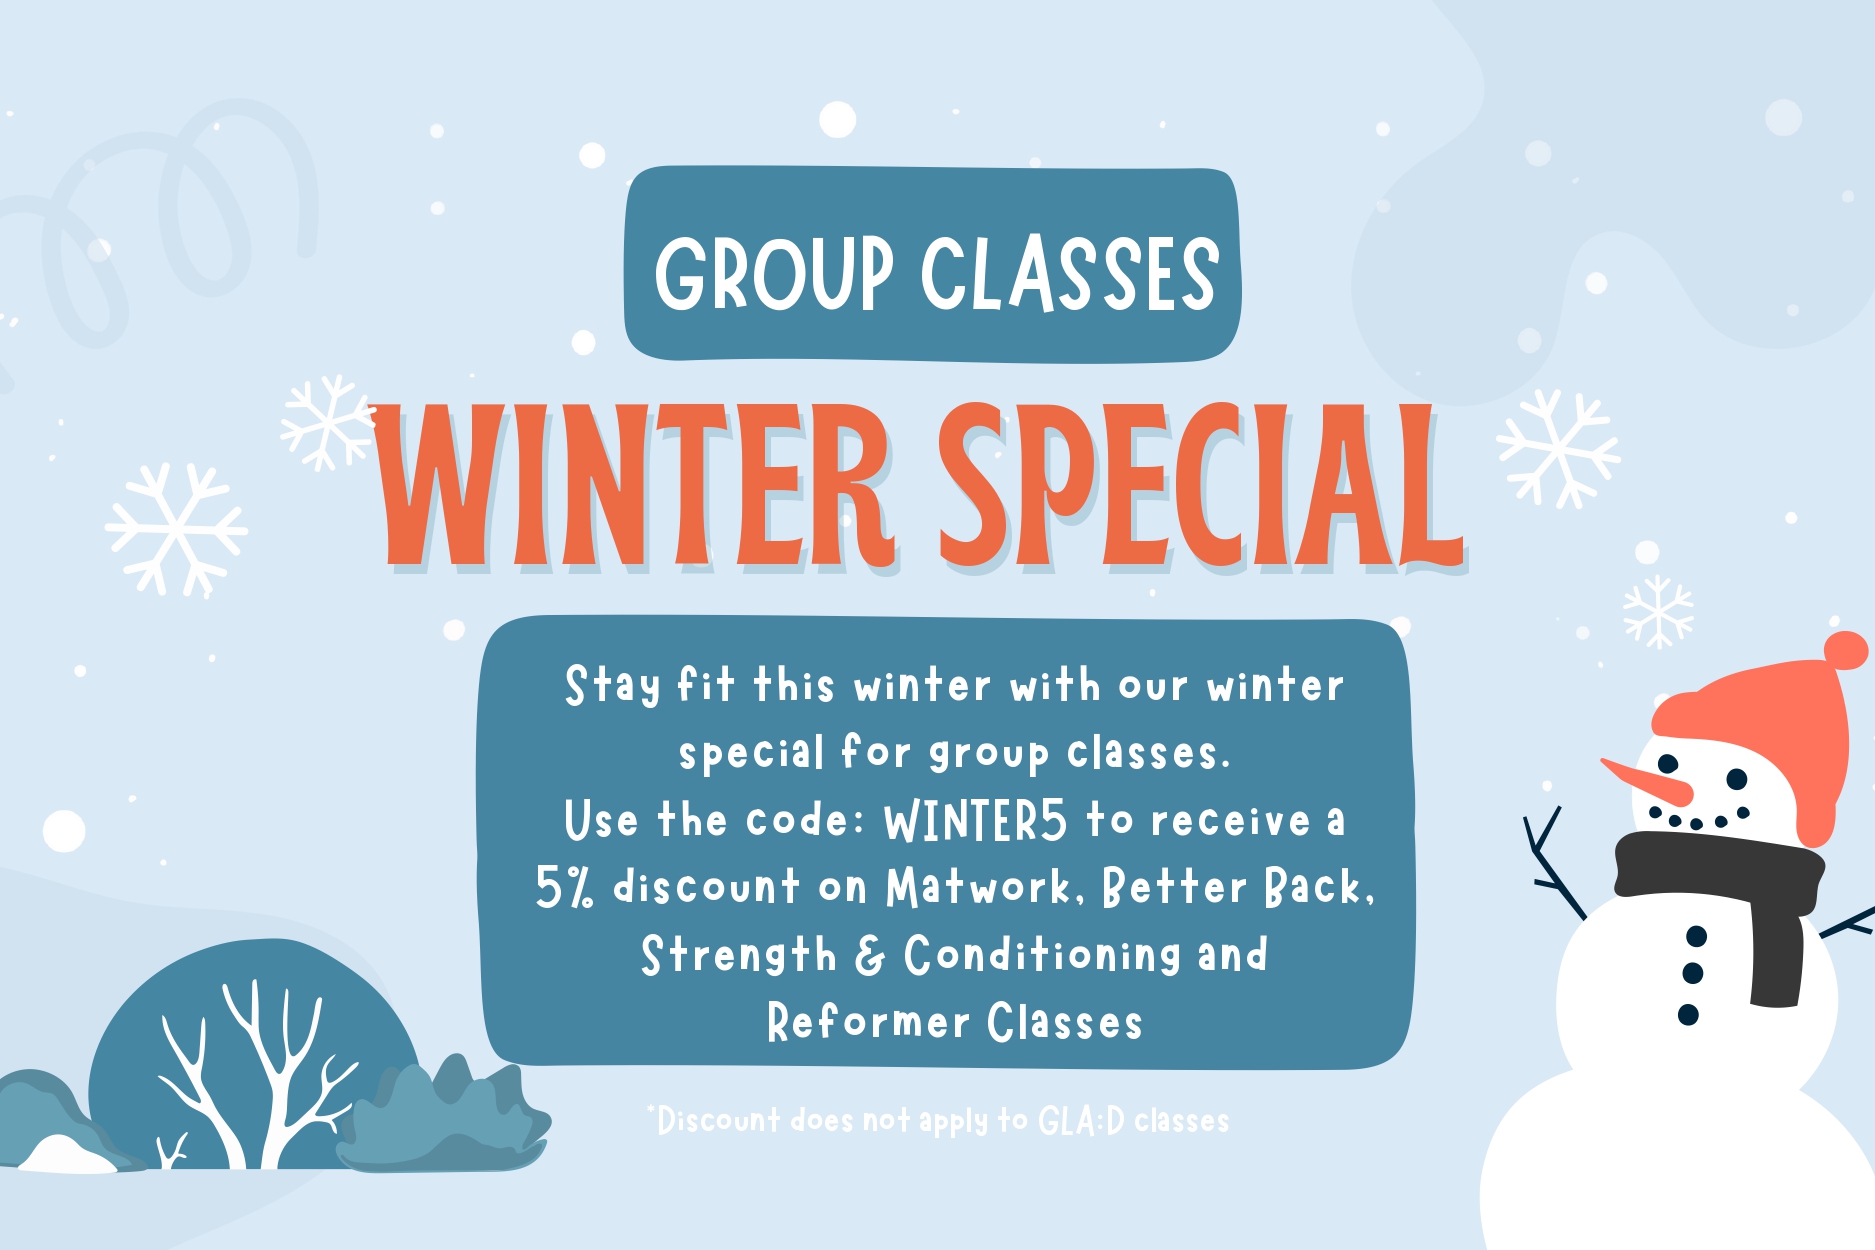 Group Classes winter special